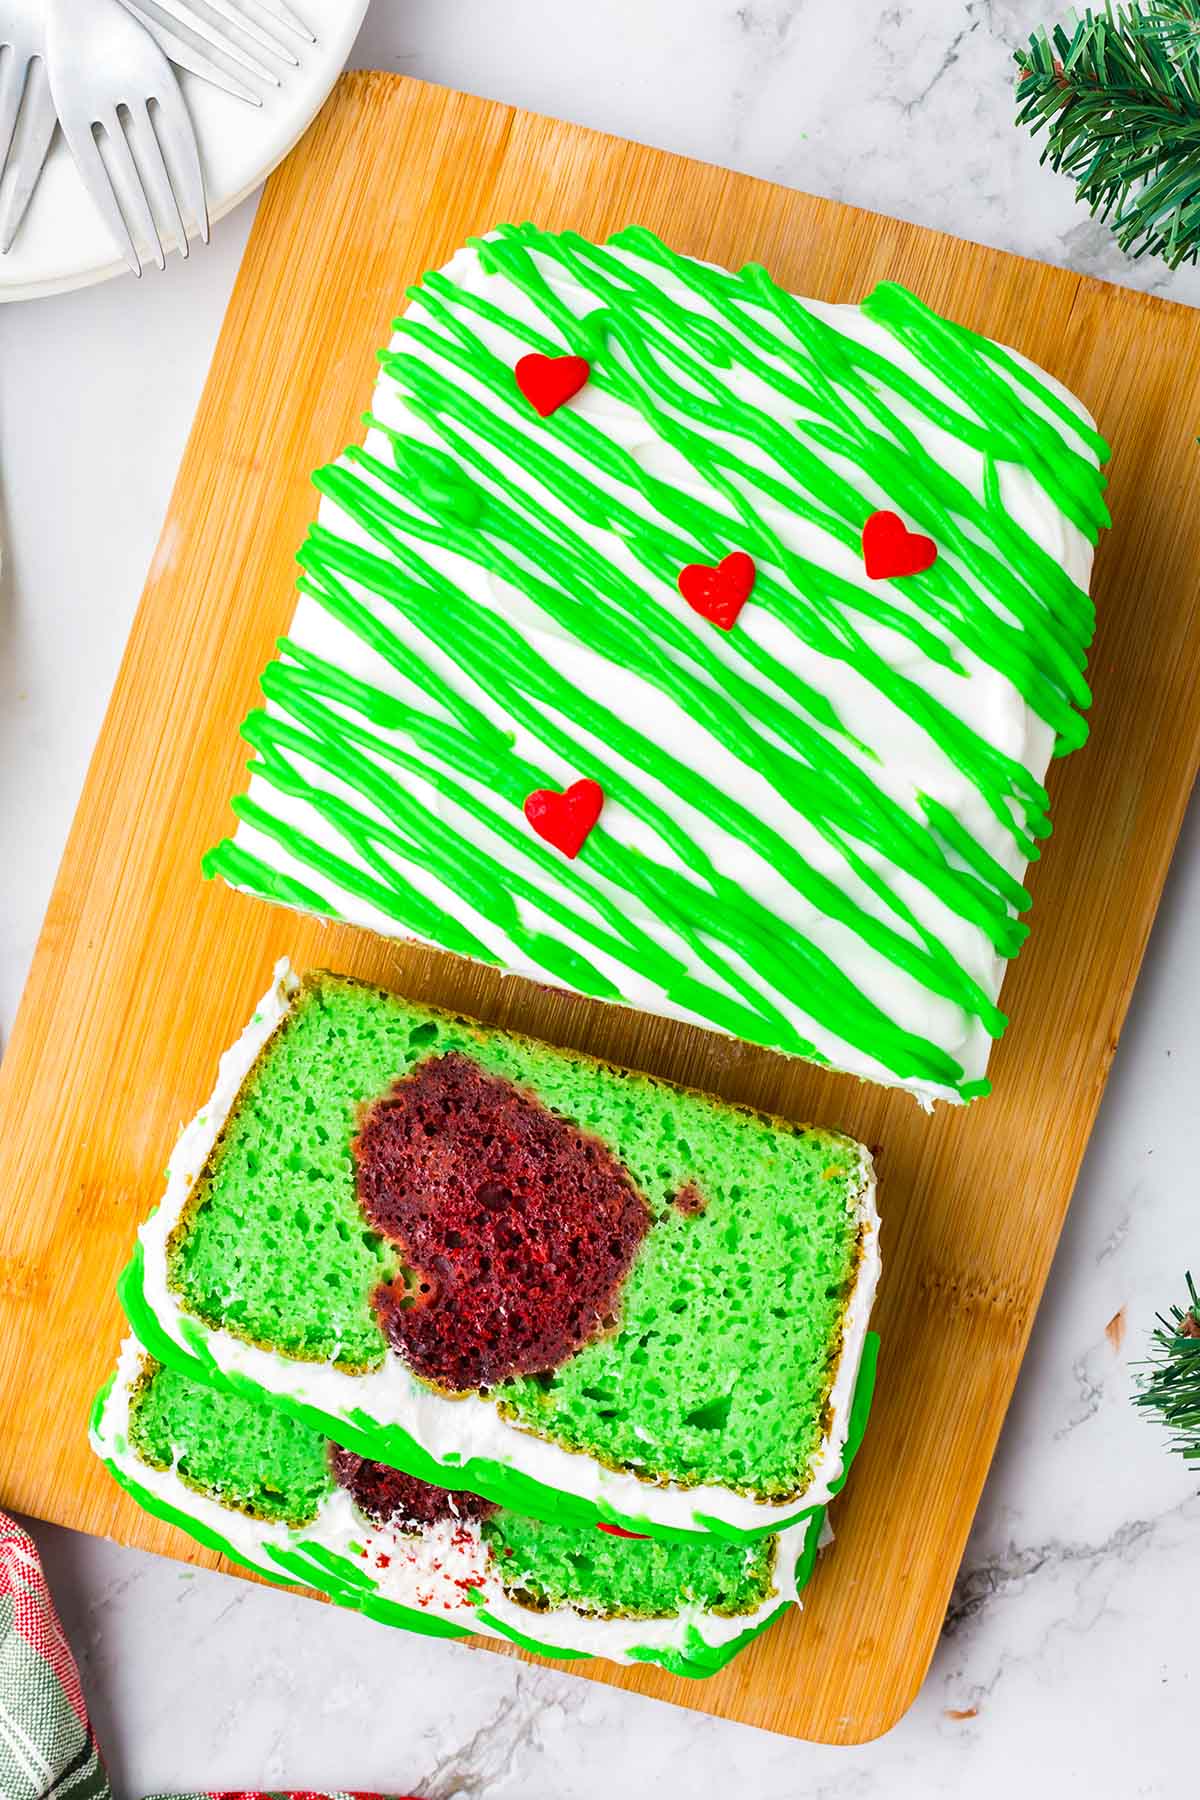 2 slices of grinch cake on a wood cutting board.